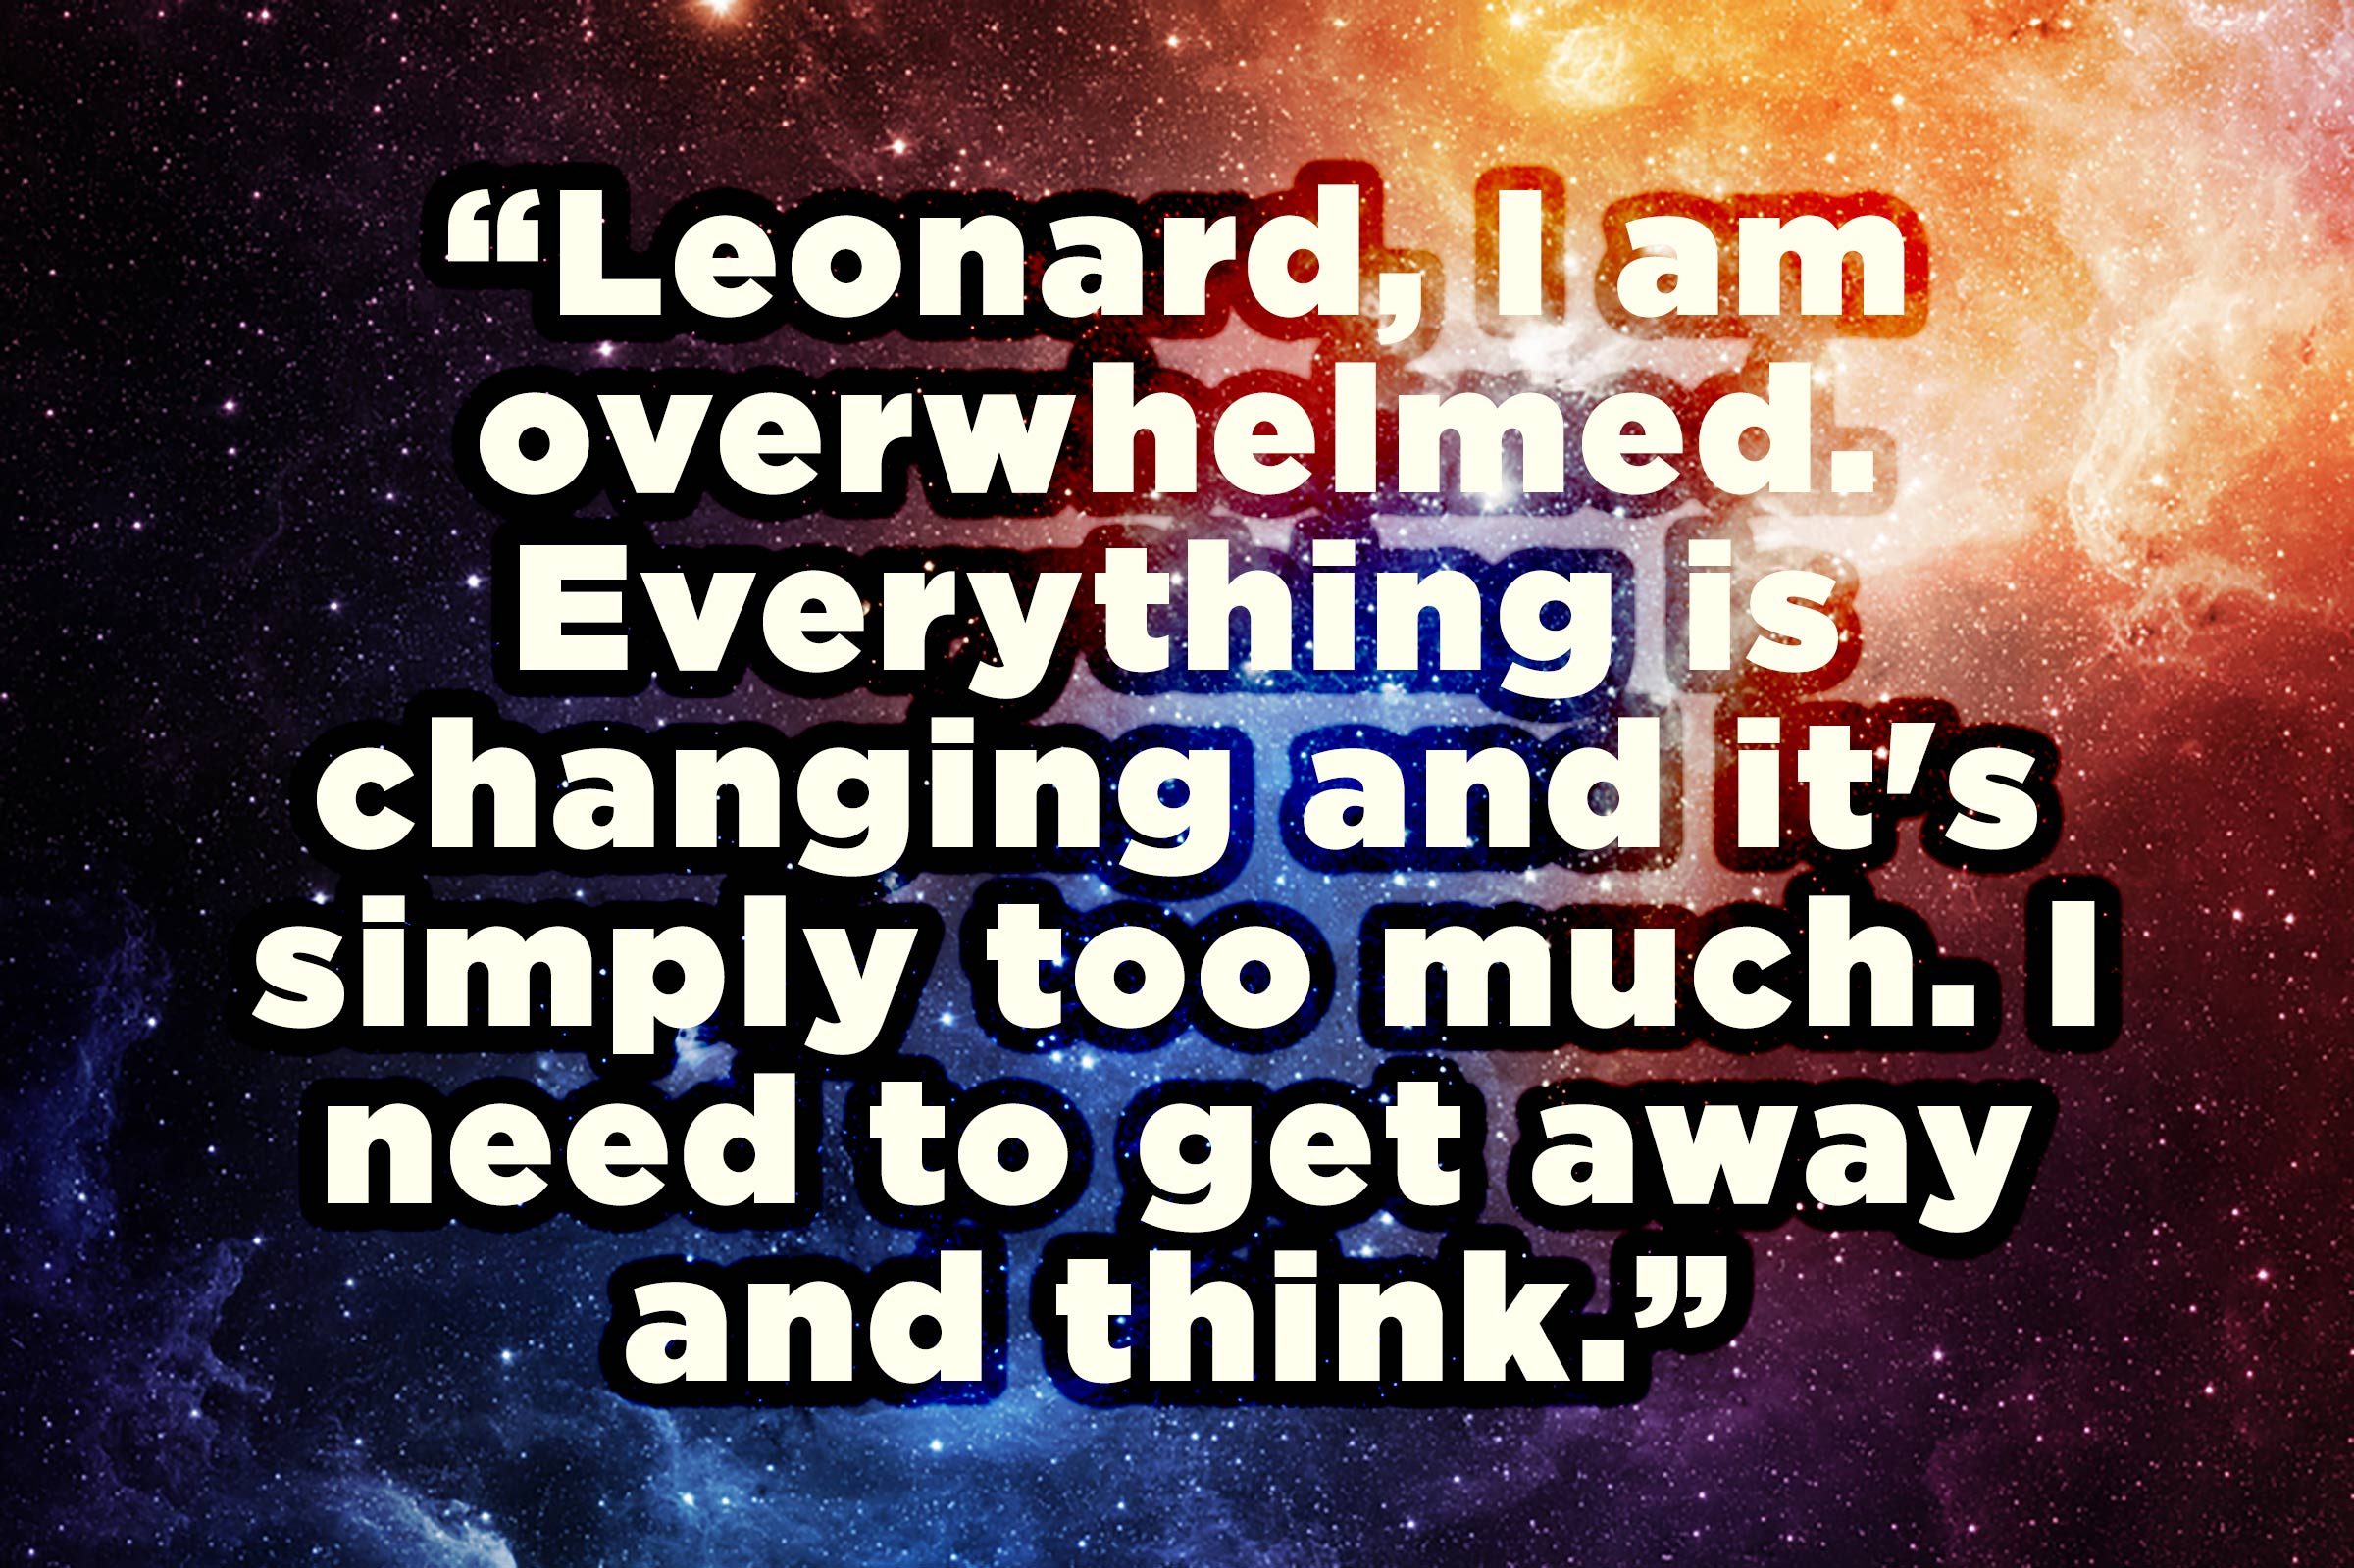 Big Bang Theory Quotes That Can Make You a Better Parent